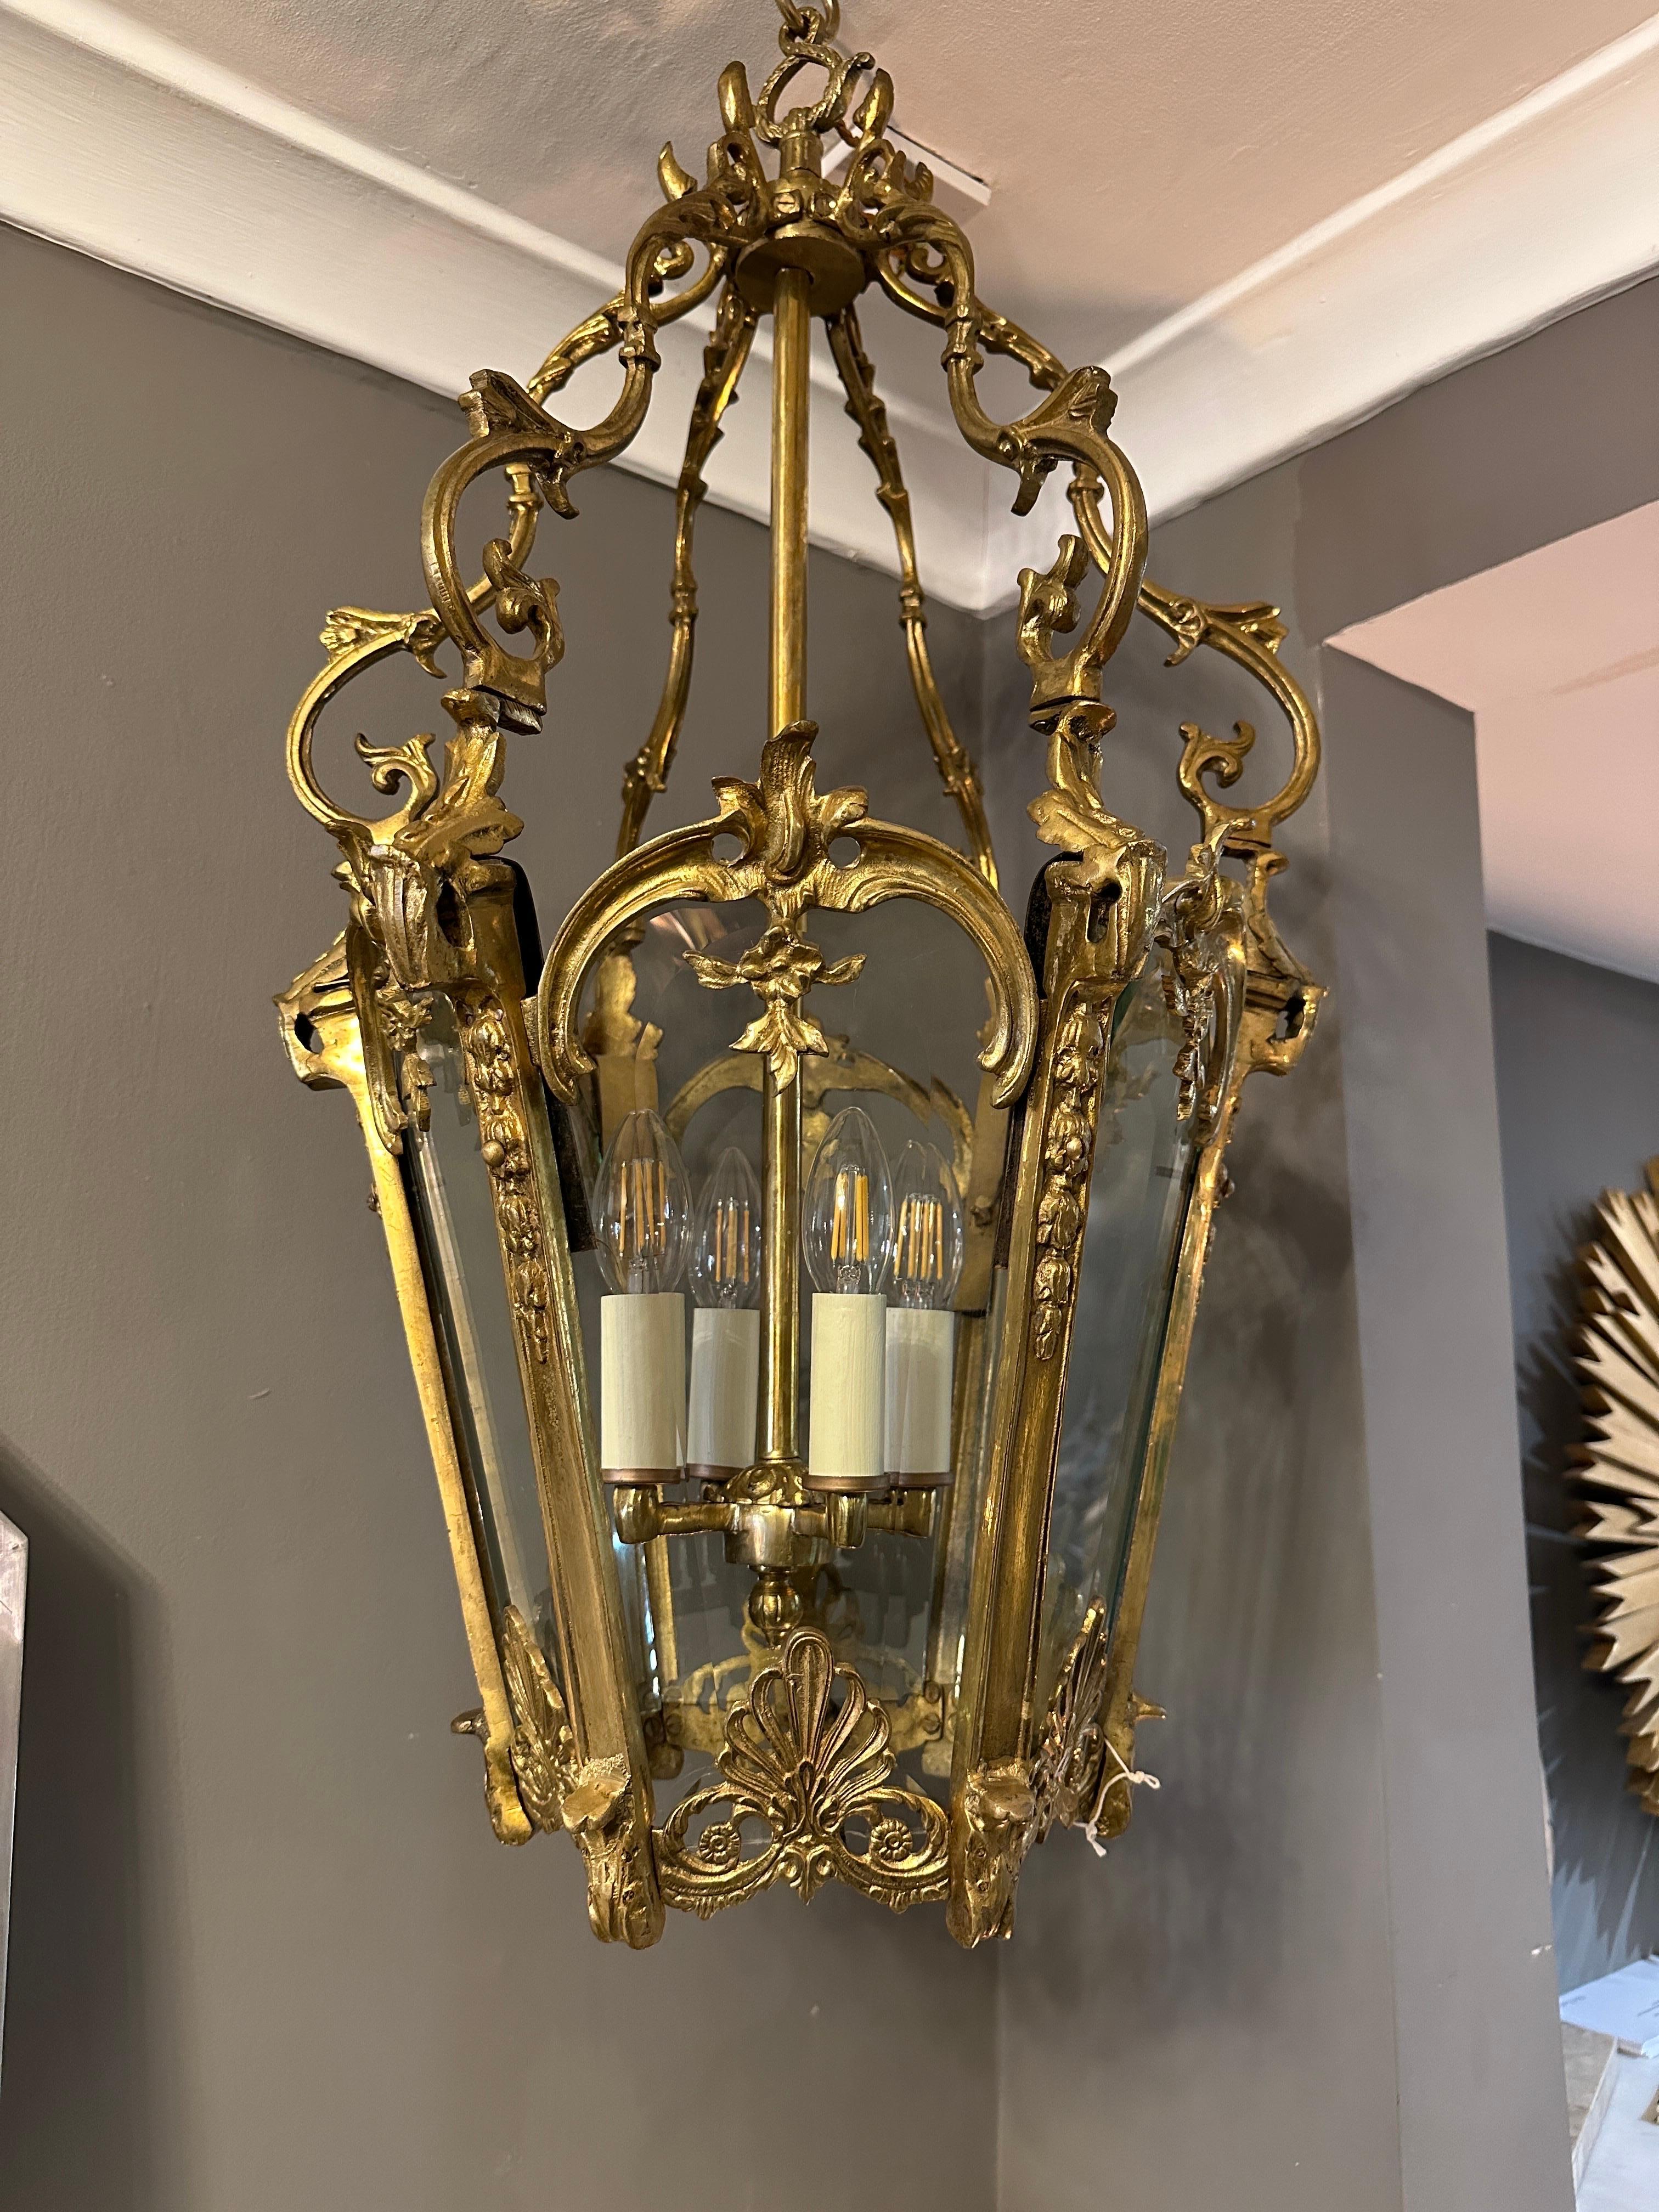 A Large antique French Louis XV style gilt bronze Rococo lantern with six cut bevelled glass panels, an ornate canopy of scrolled acanthus and foliate. The glass panels framed with C scroll and flowers with anthemion honey suckle design to bottom.